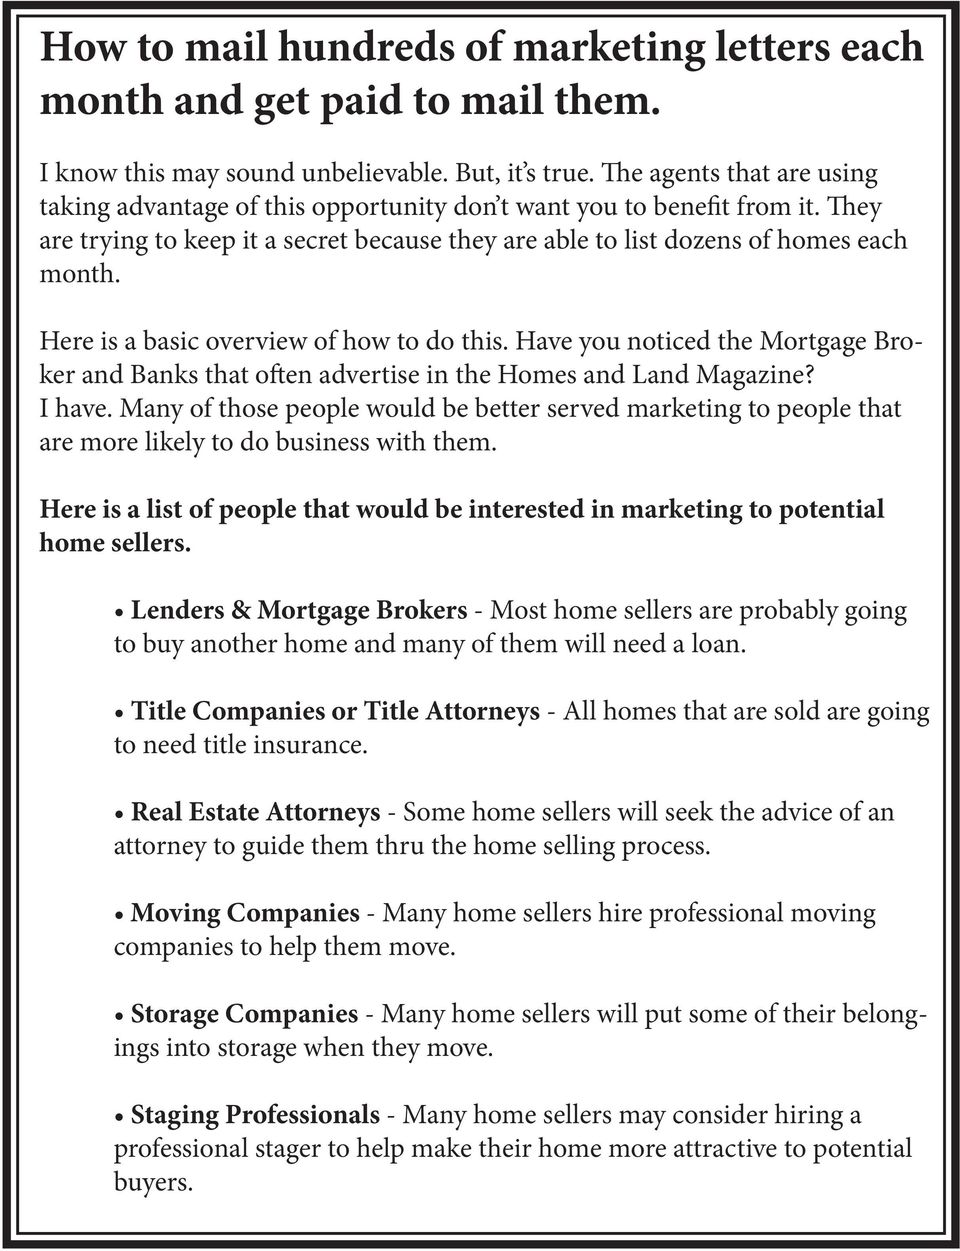 Here is a basic overview of how to do this. Have you noticed the Mortgage Broker and Banks that often advertise in the Homes and Land Magazine? I have.